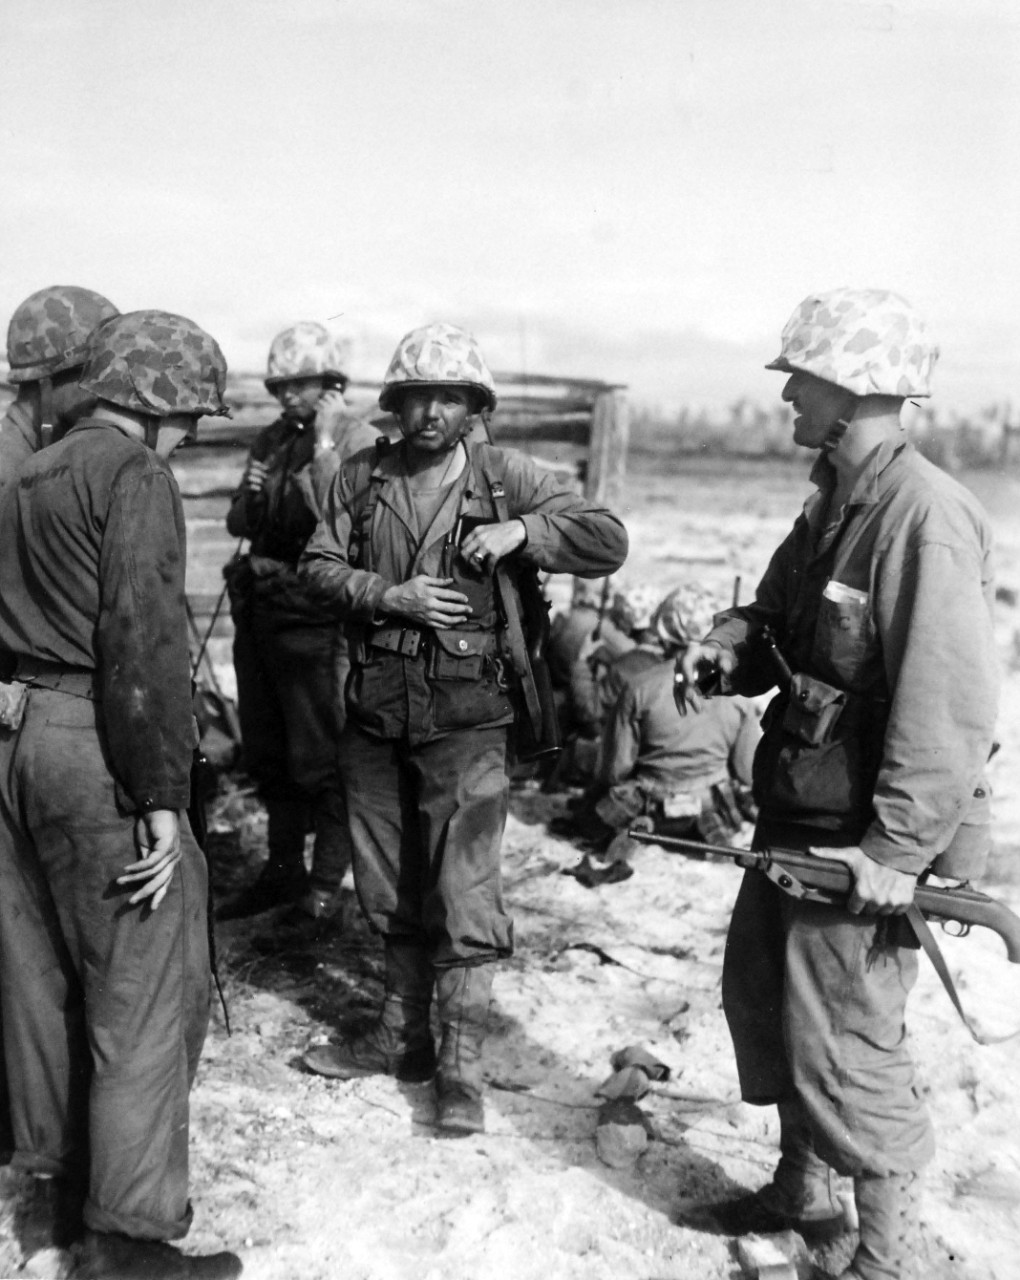 80-G-208973:  Operation Flintlock, January-February 1944.   Fourth Marine Division attack on Roi Island, Kwajalein Atoll, Marshall Islands, February 1-2, 1944.   Shown:  Colonel Edward J. Dillion directing mopping-up operations.  To right is First Lieutenant Godfrey F. Zimmerman, Air Liaison Officer.   Official U.S. Navy photograph, now in the collections of the National Archives.  (2017/07/25).  